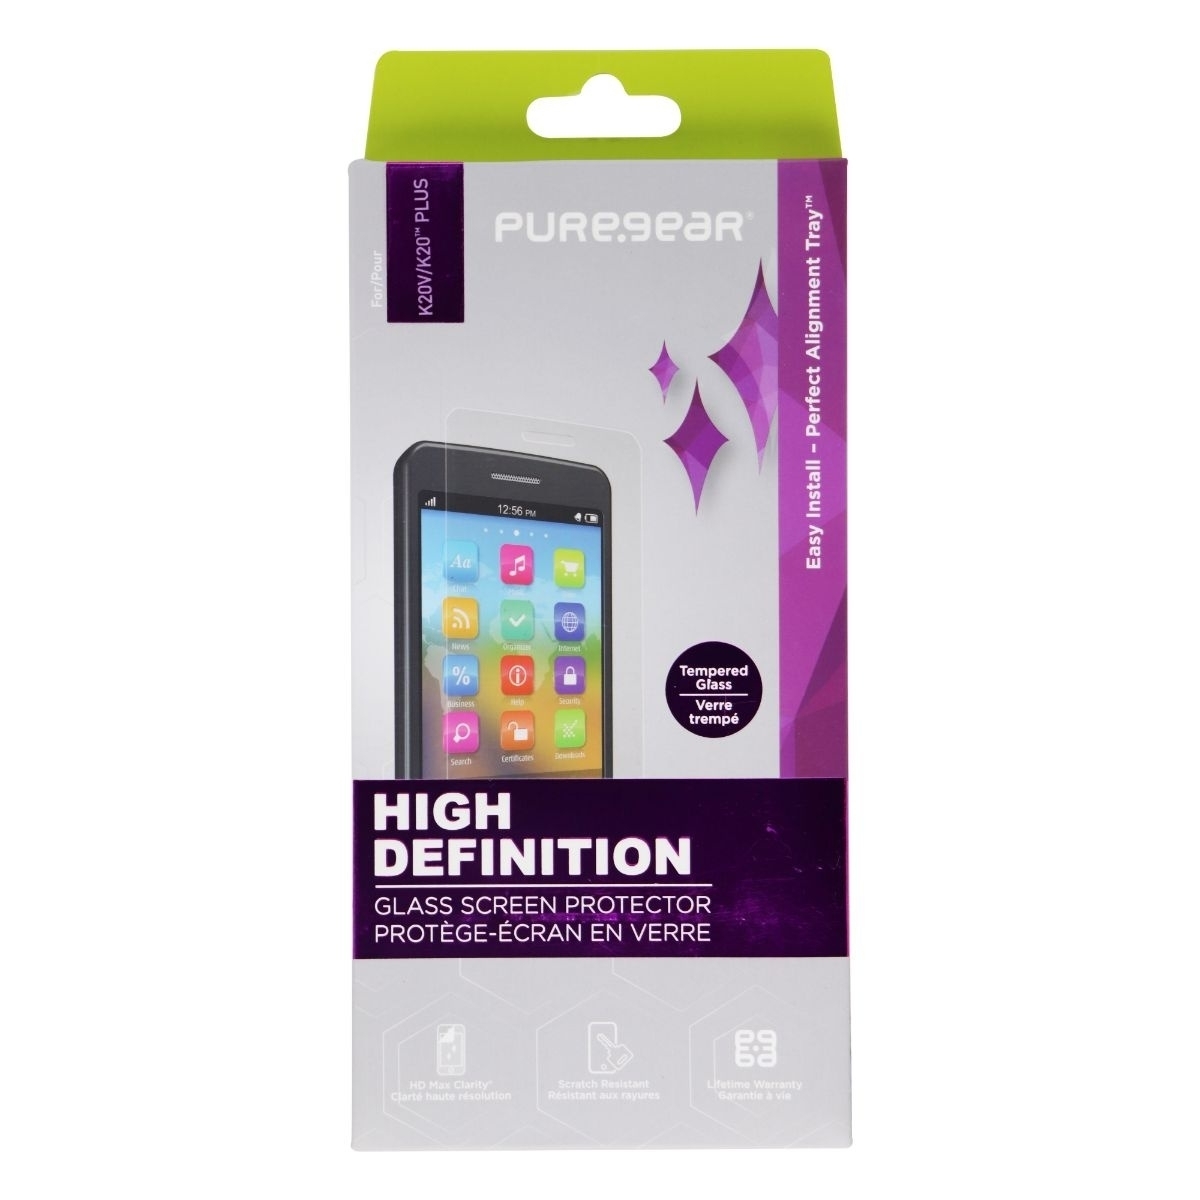 PureGear High Definition Glass Screen Protector For LG K20V / K20 Plus - Clear